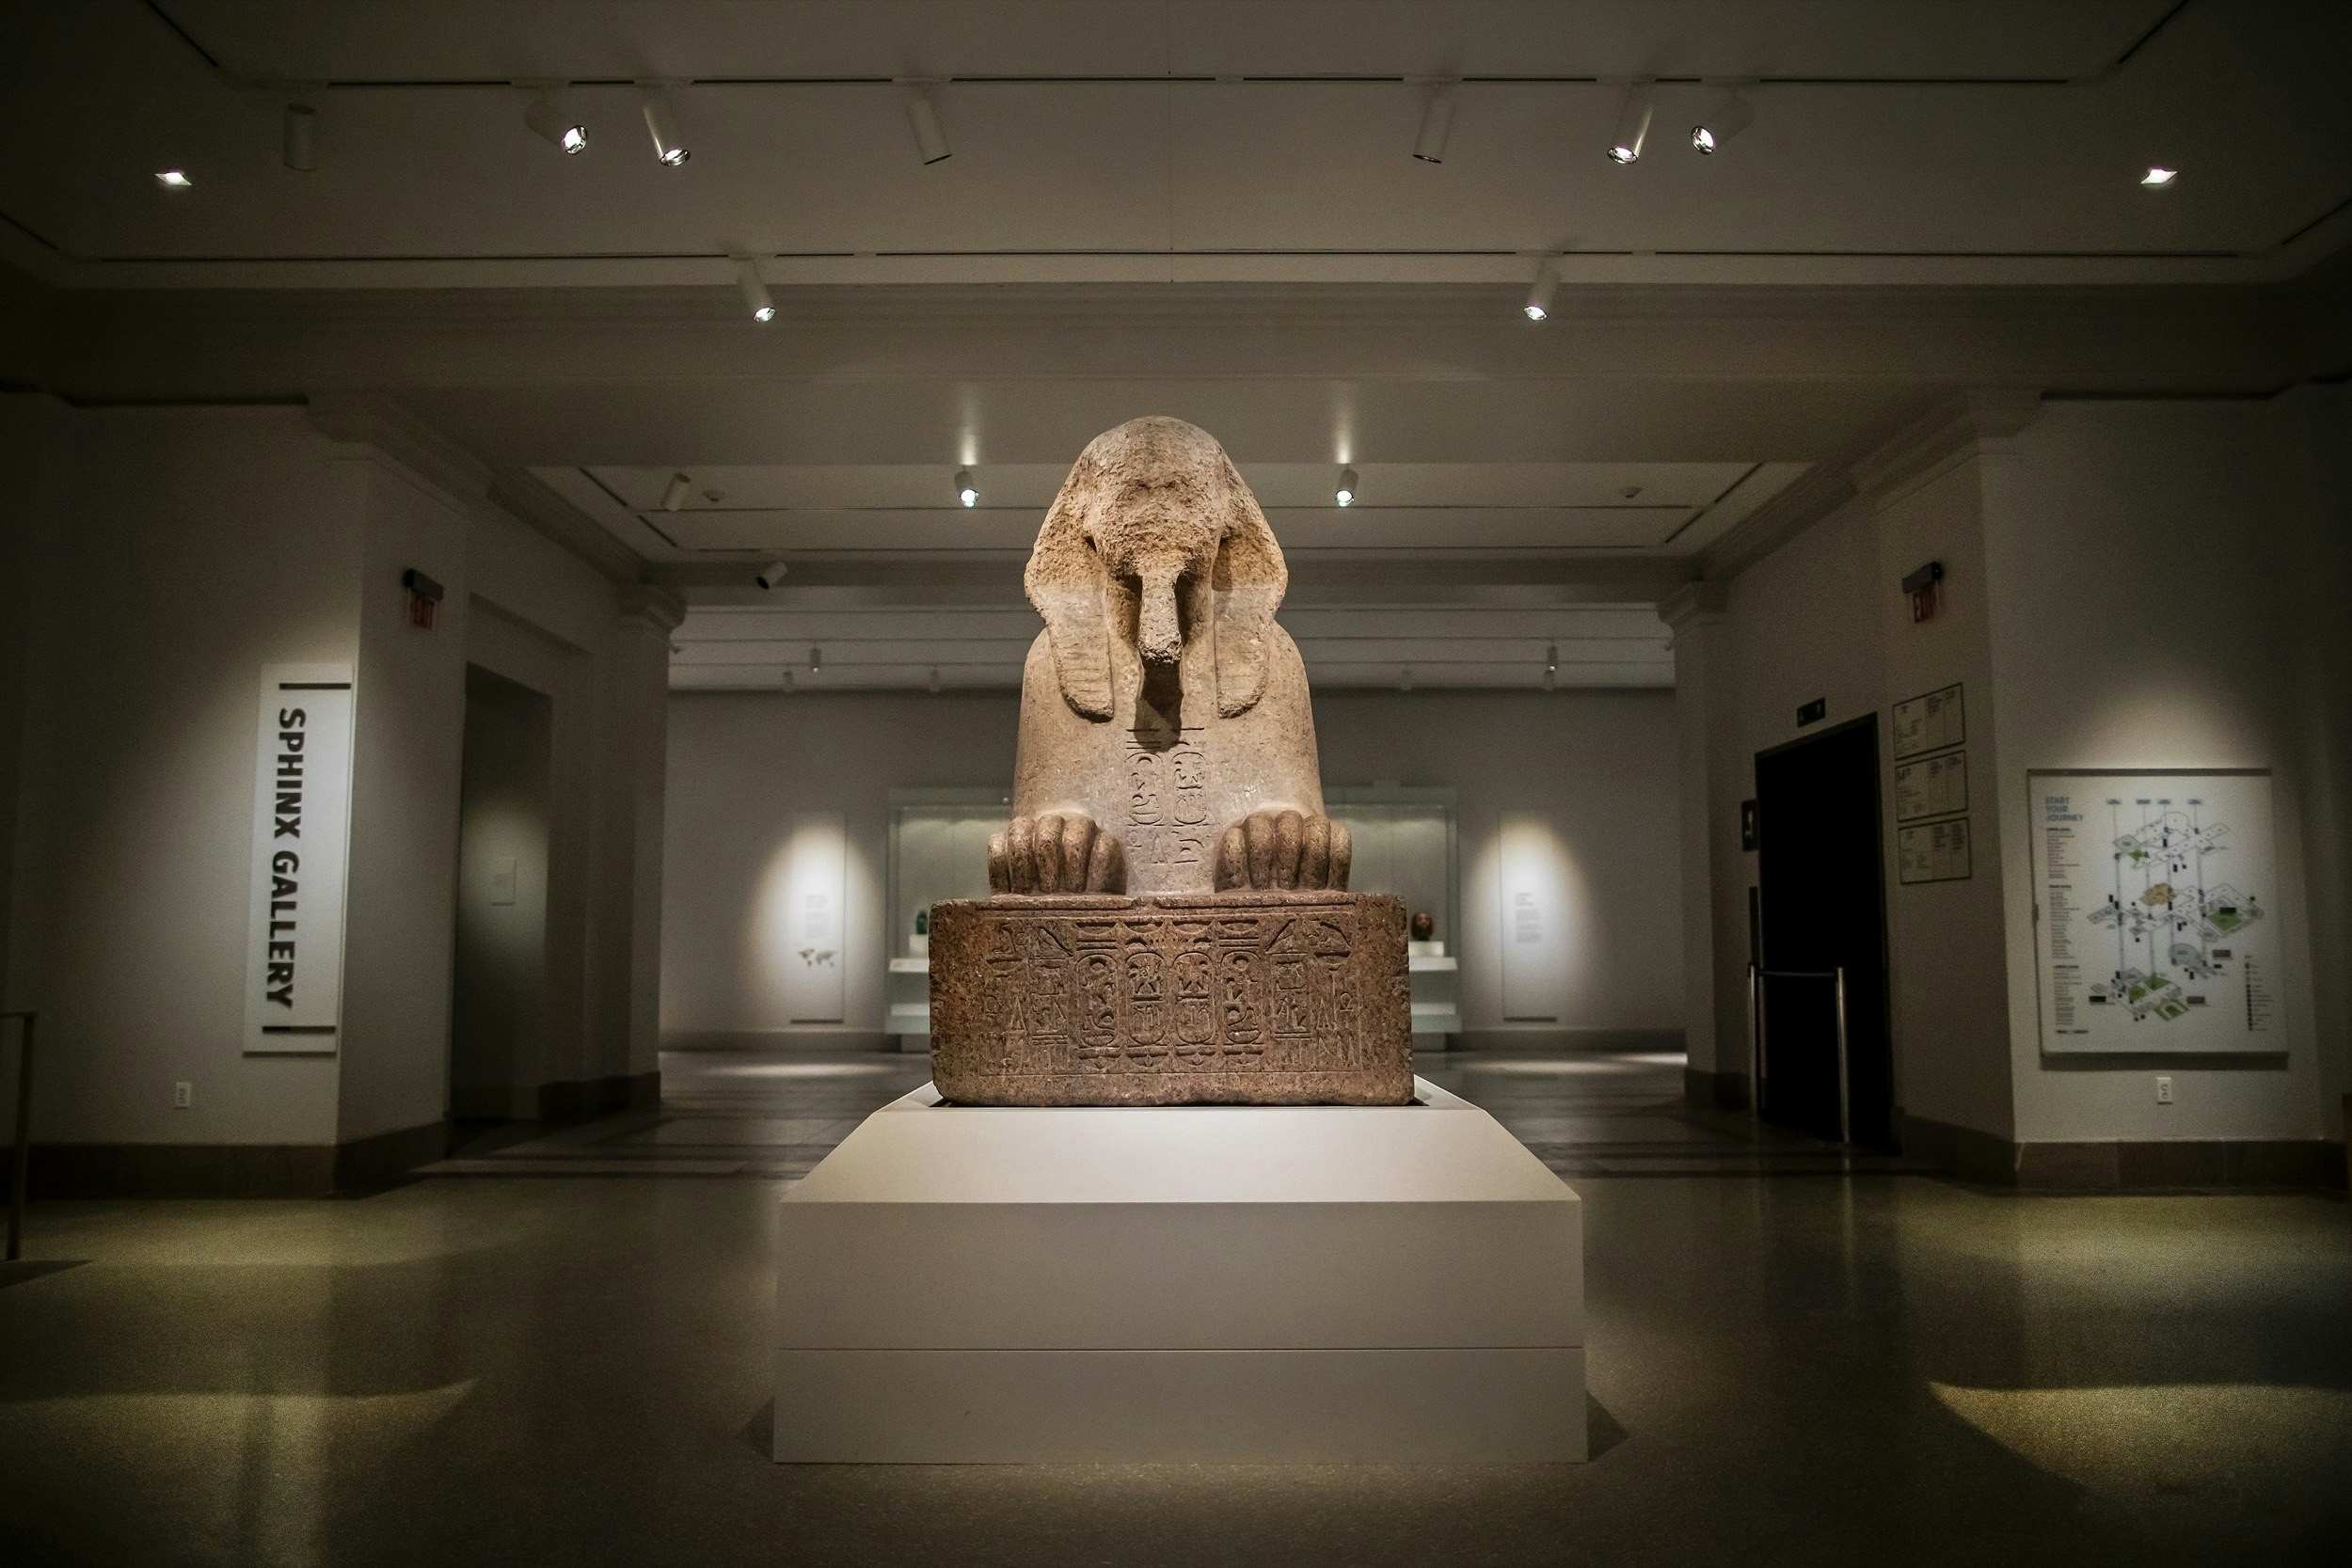 A Sphinx is one of the primary attractions at the Penn Museum in Philadelphia